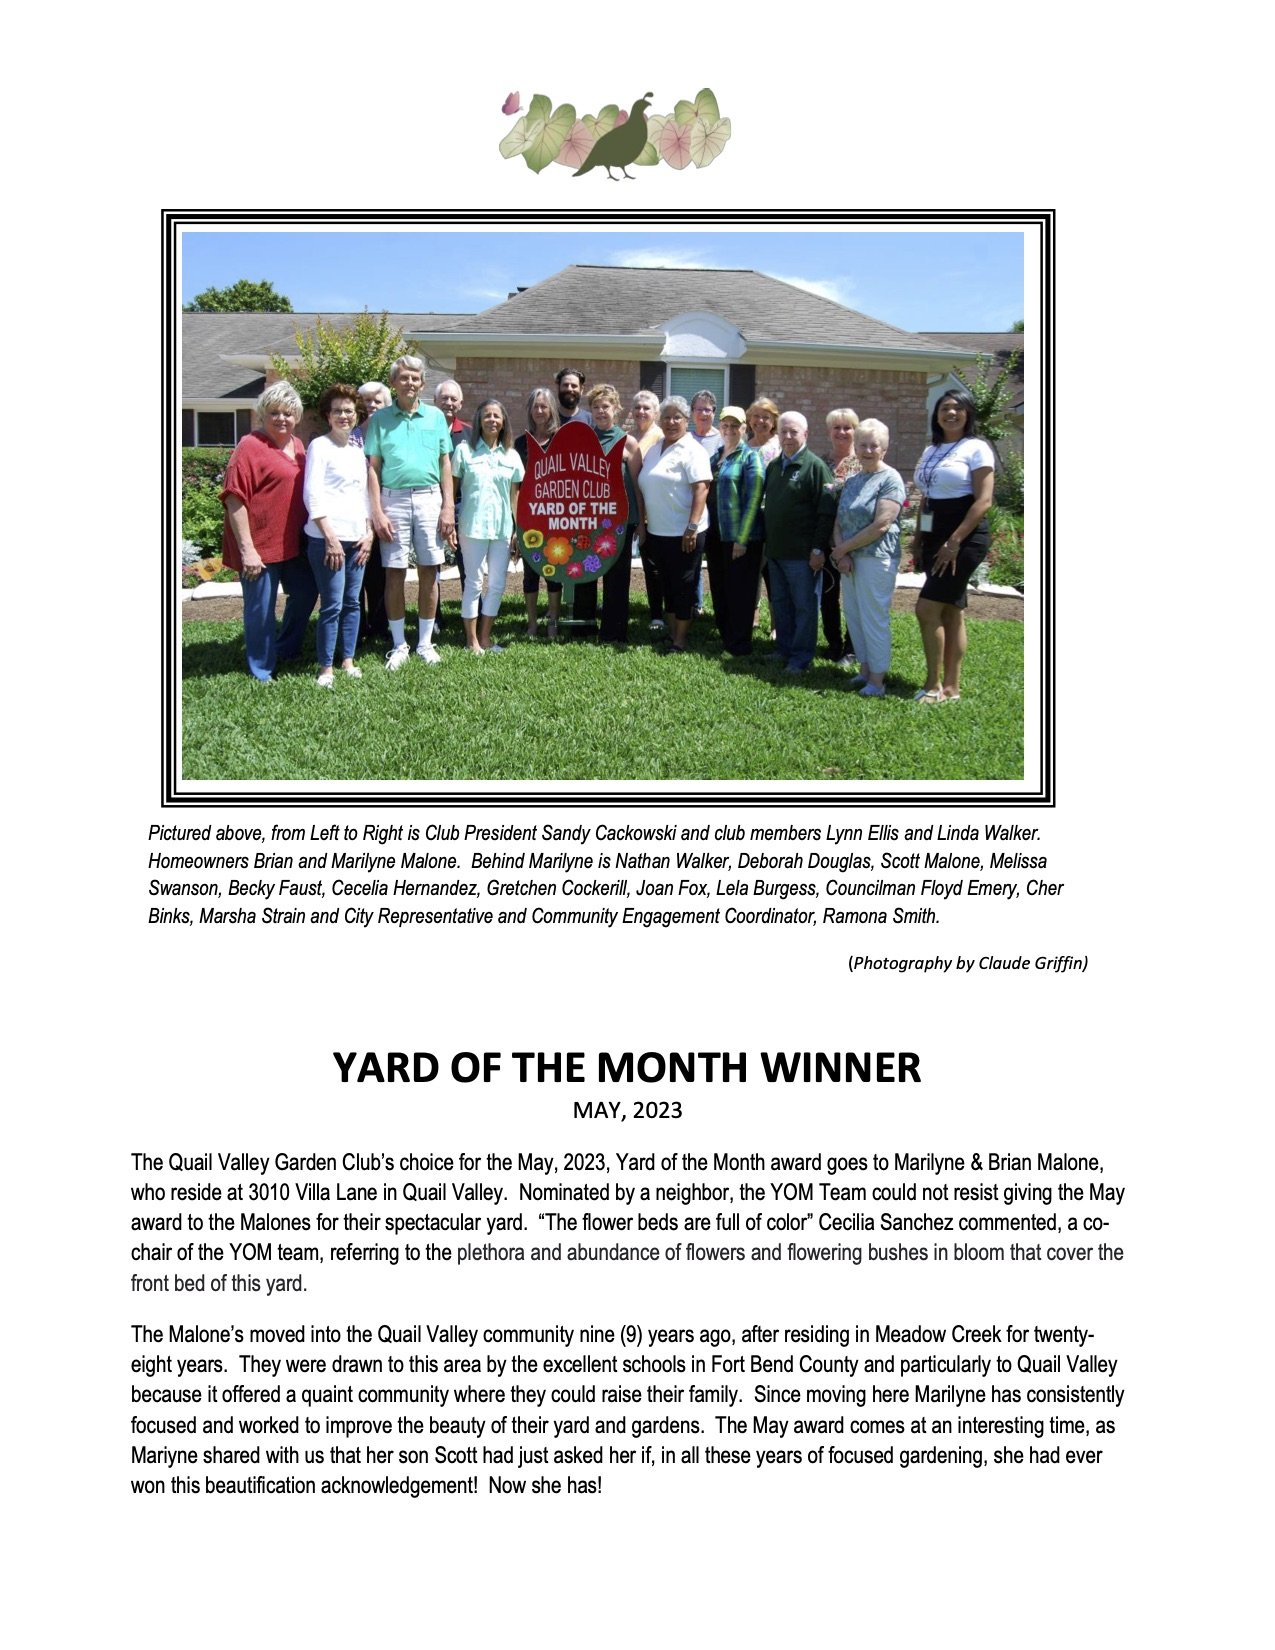 QVGC YOM Announcement Article -Yard of the Month - May, 2023.jpg